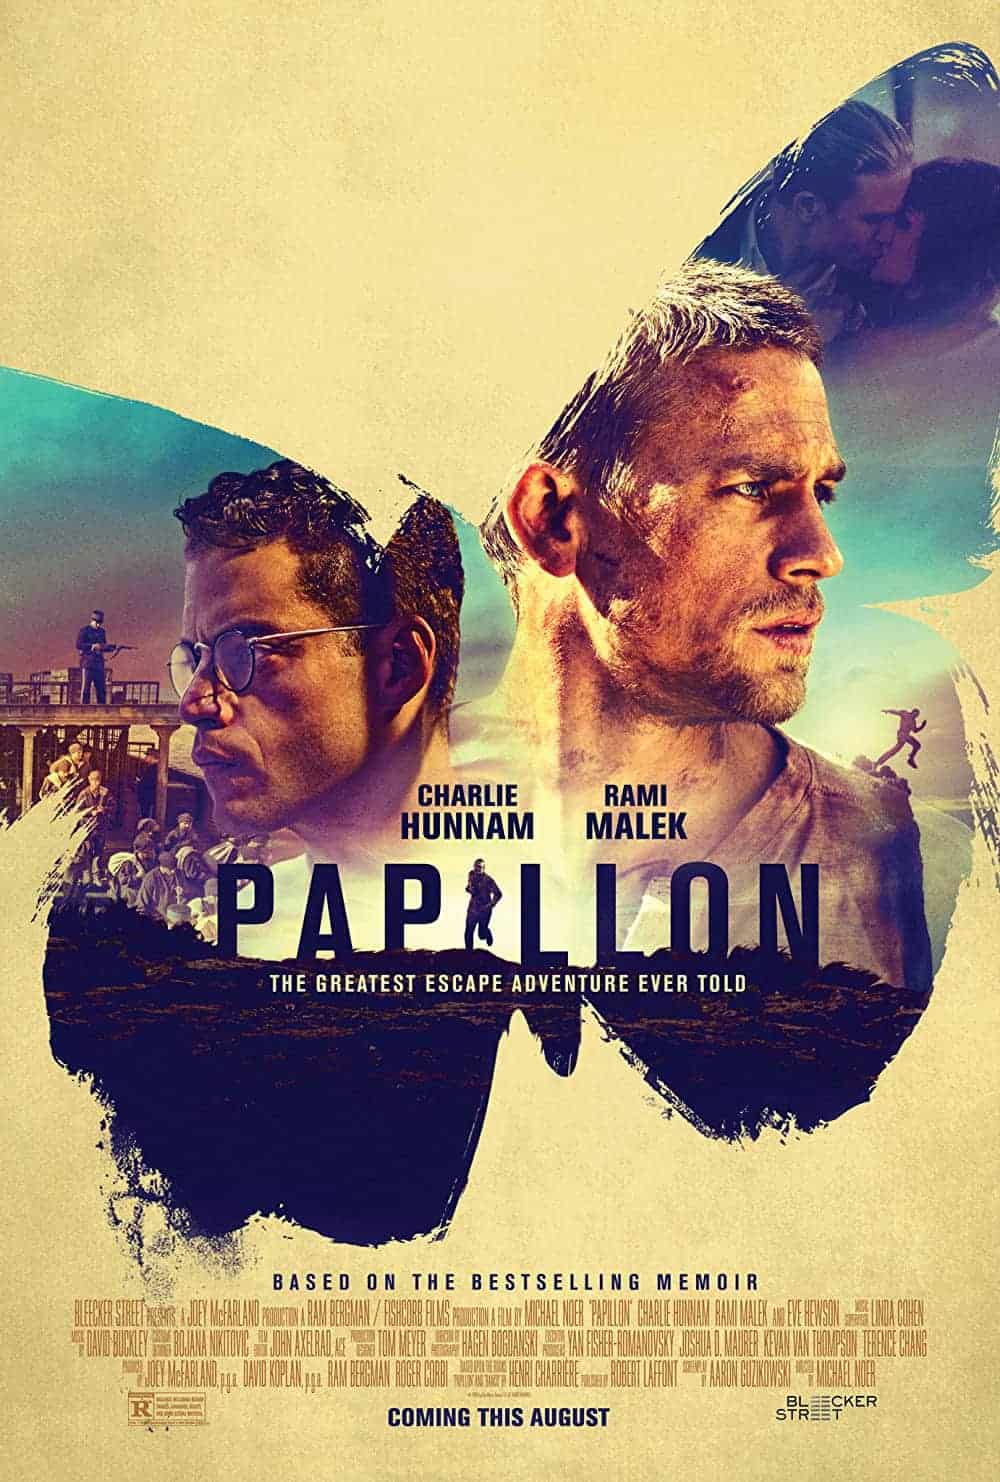 Papillon (2017) 17 Best Prison Escape Movies to Add in Your Watchlist